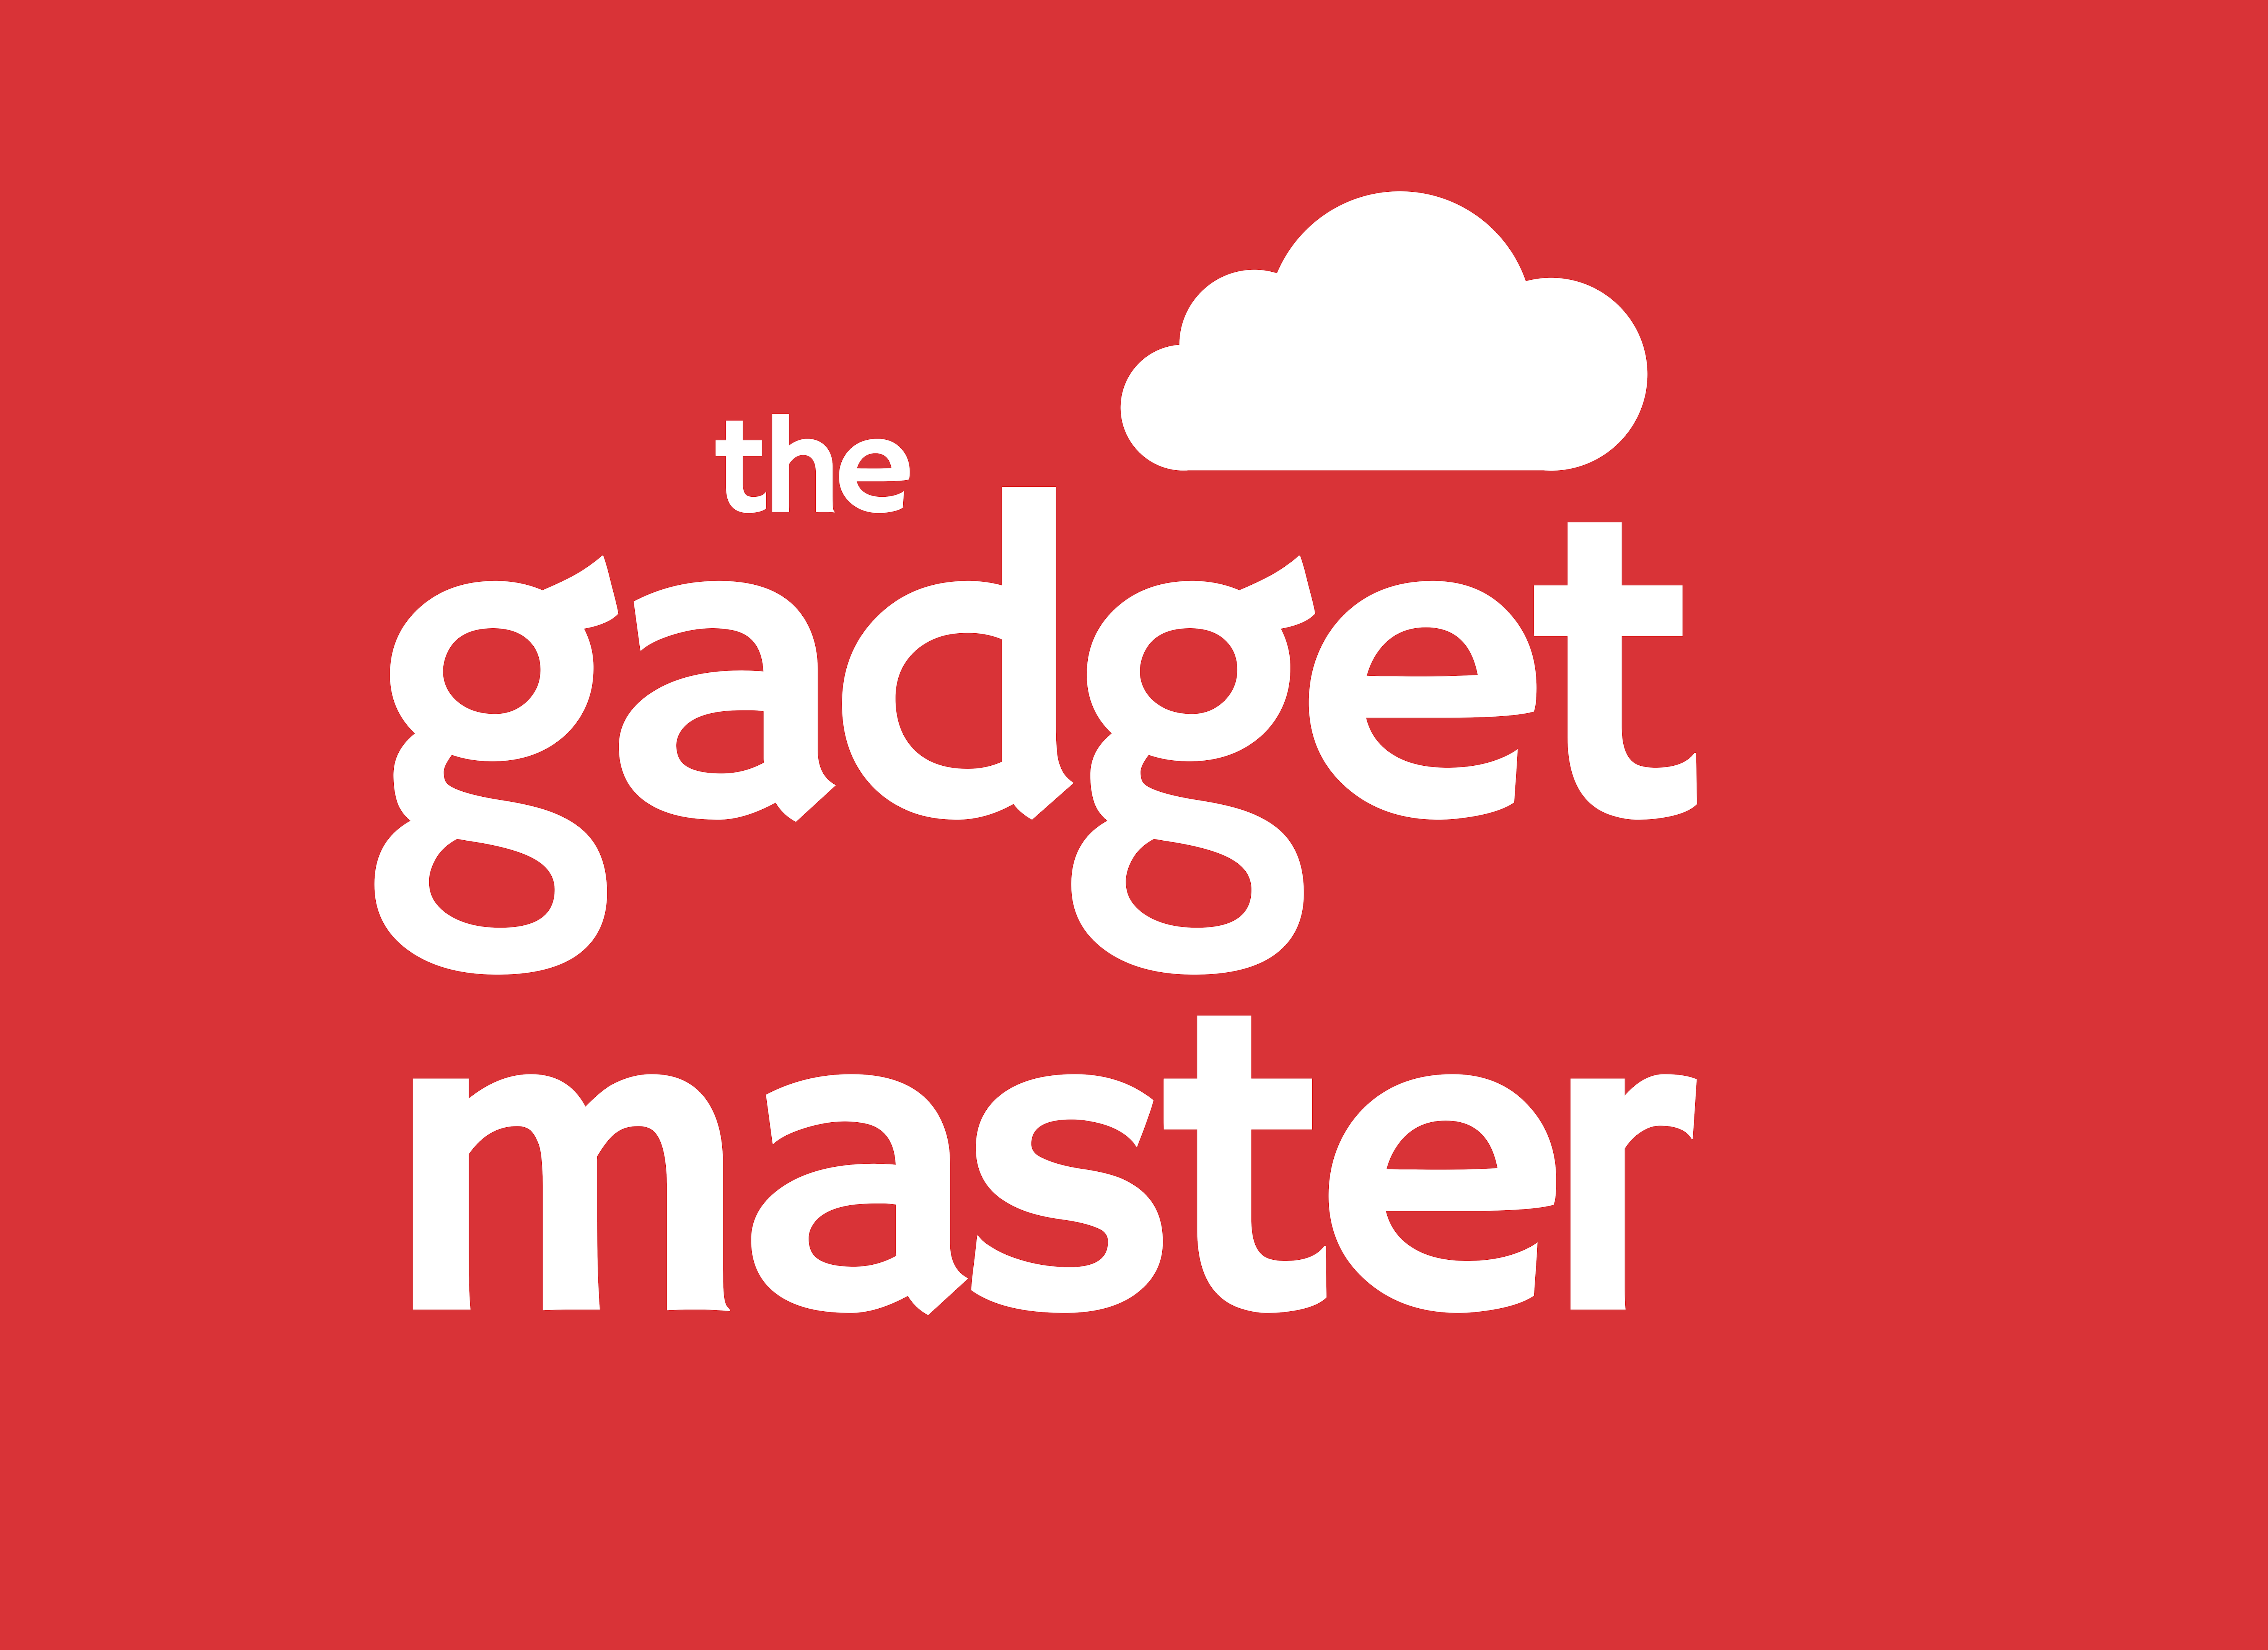 The gadget master